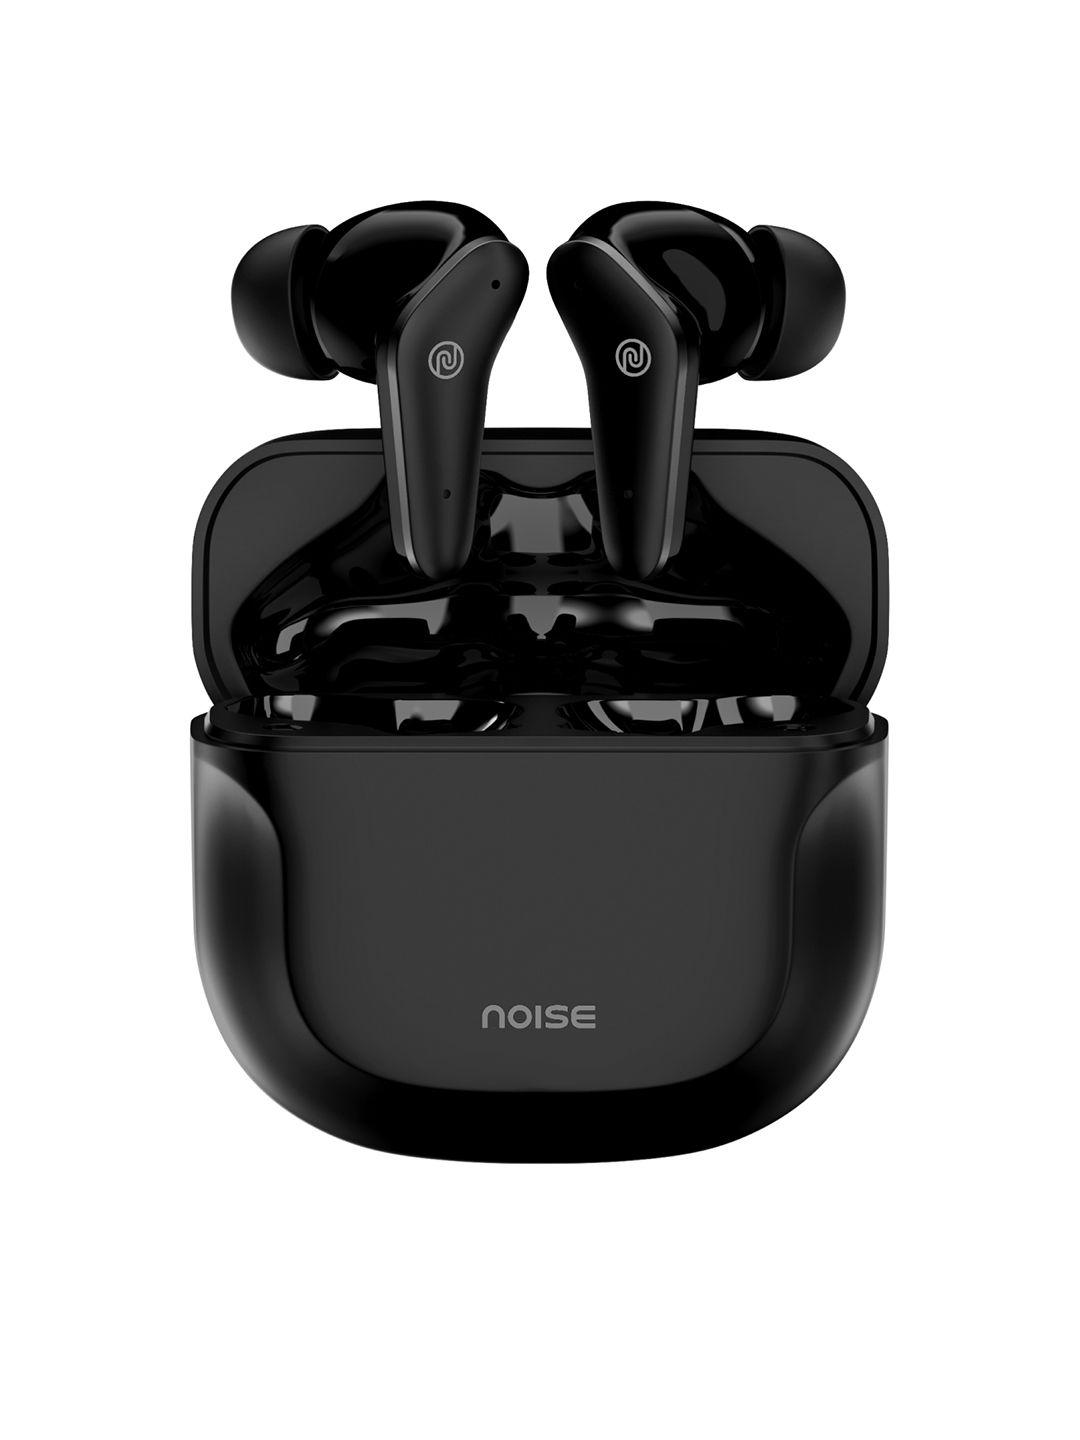 noise buds vs102 pro truly wireless earbuds with 25db anc and 70hrs playtime